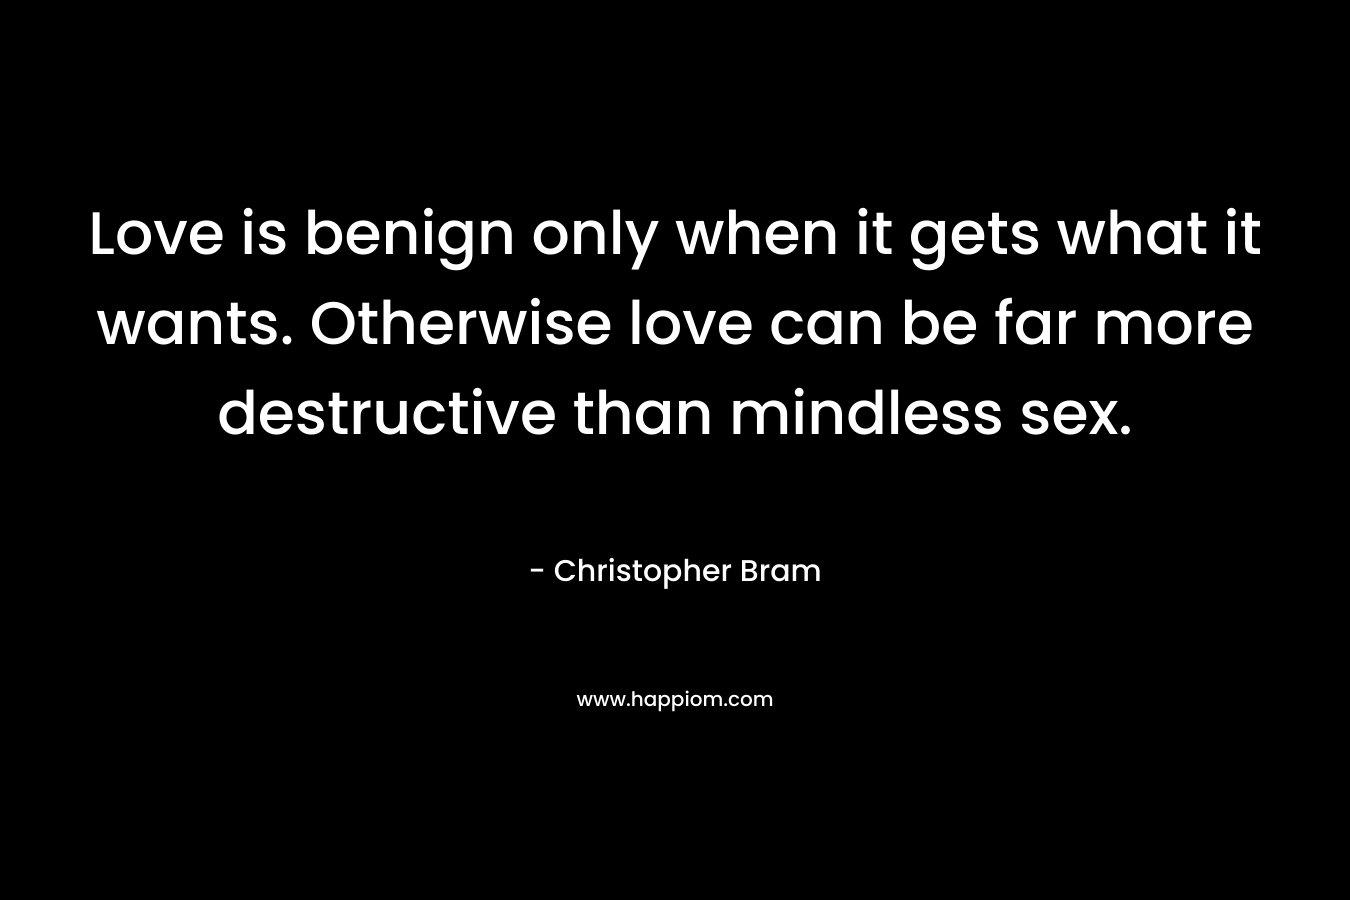 Love is benign only when it gets what it wants. Otherwise love can be far more destructive than mindless sex.